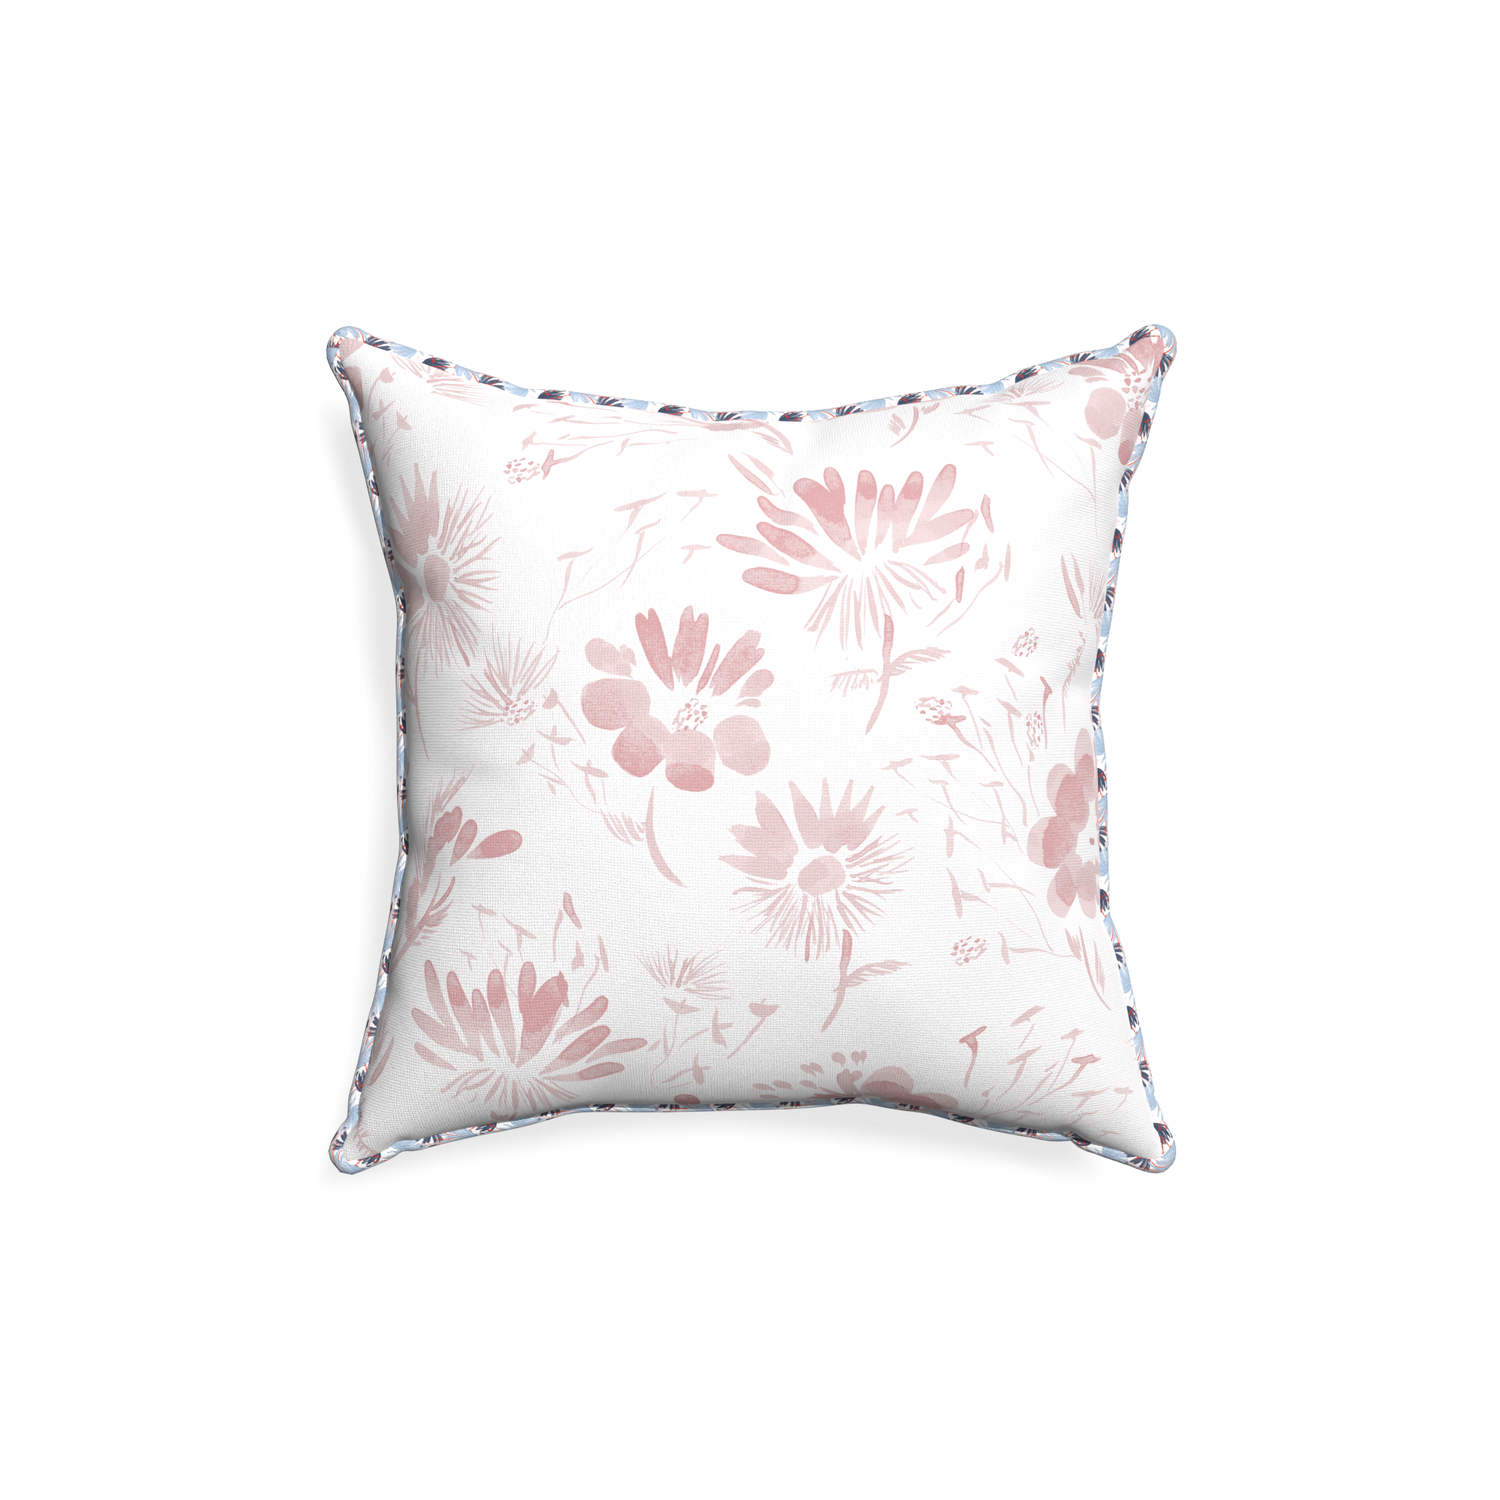 18-square blake custom pink floralpillow with e piping on white background